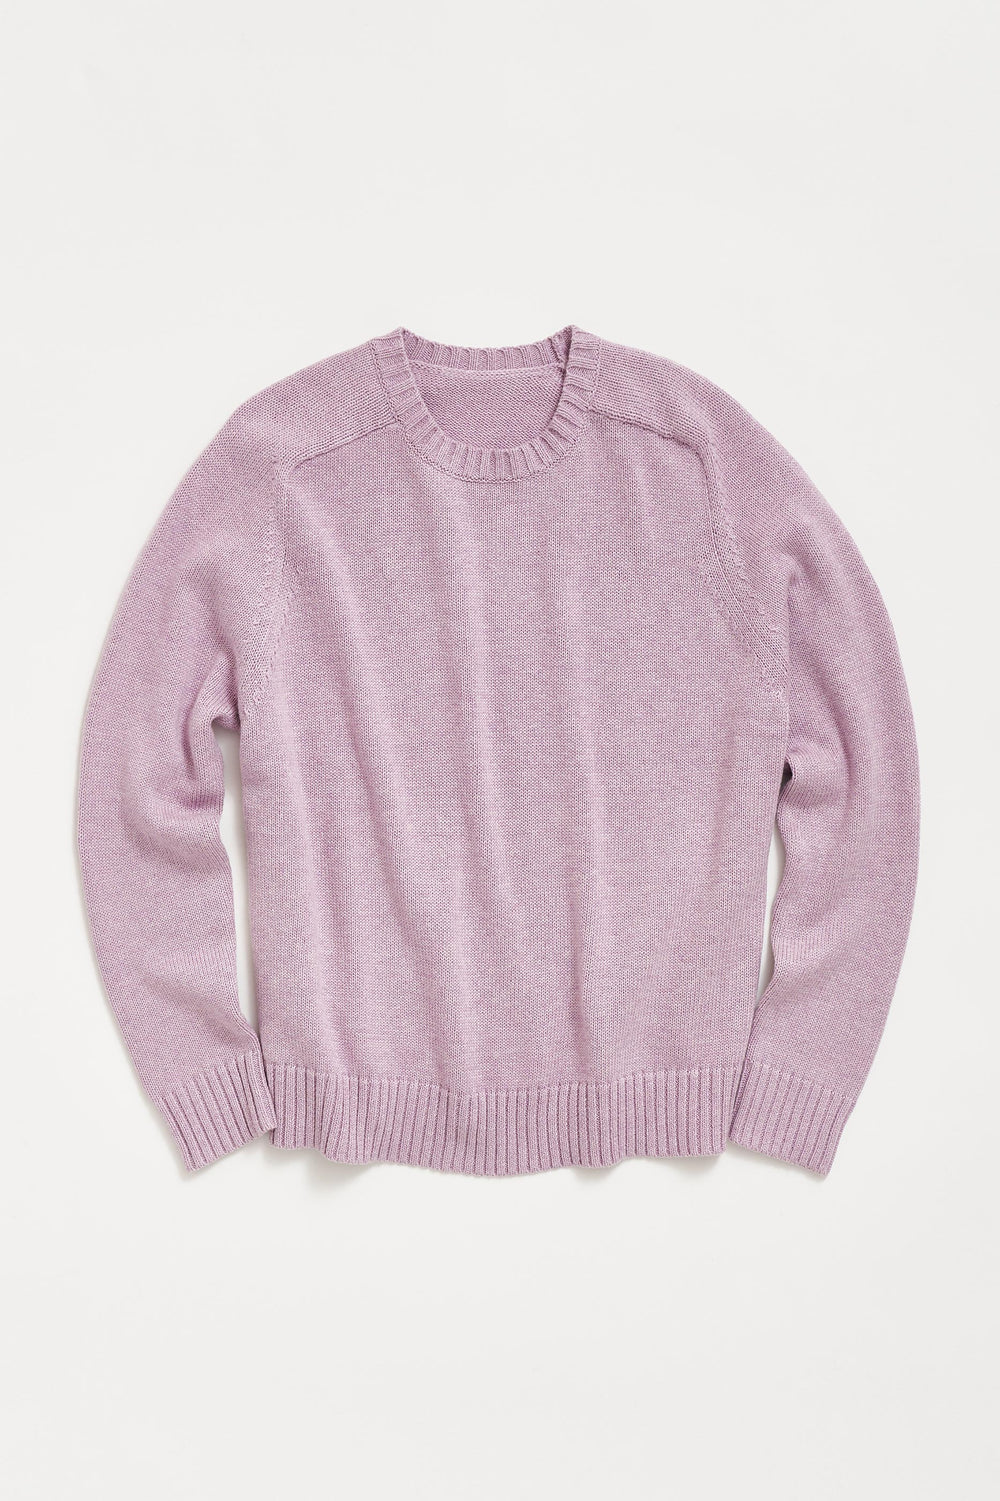 Madison Sweater in Lilac